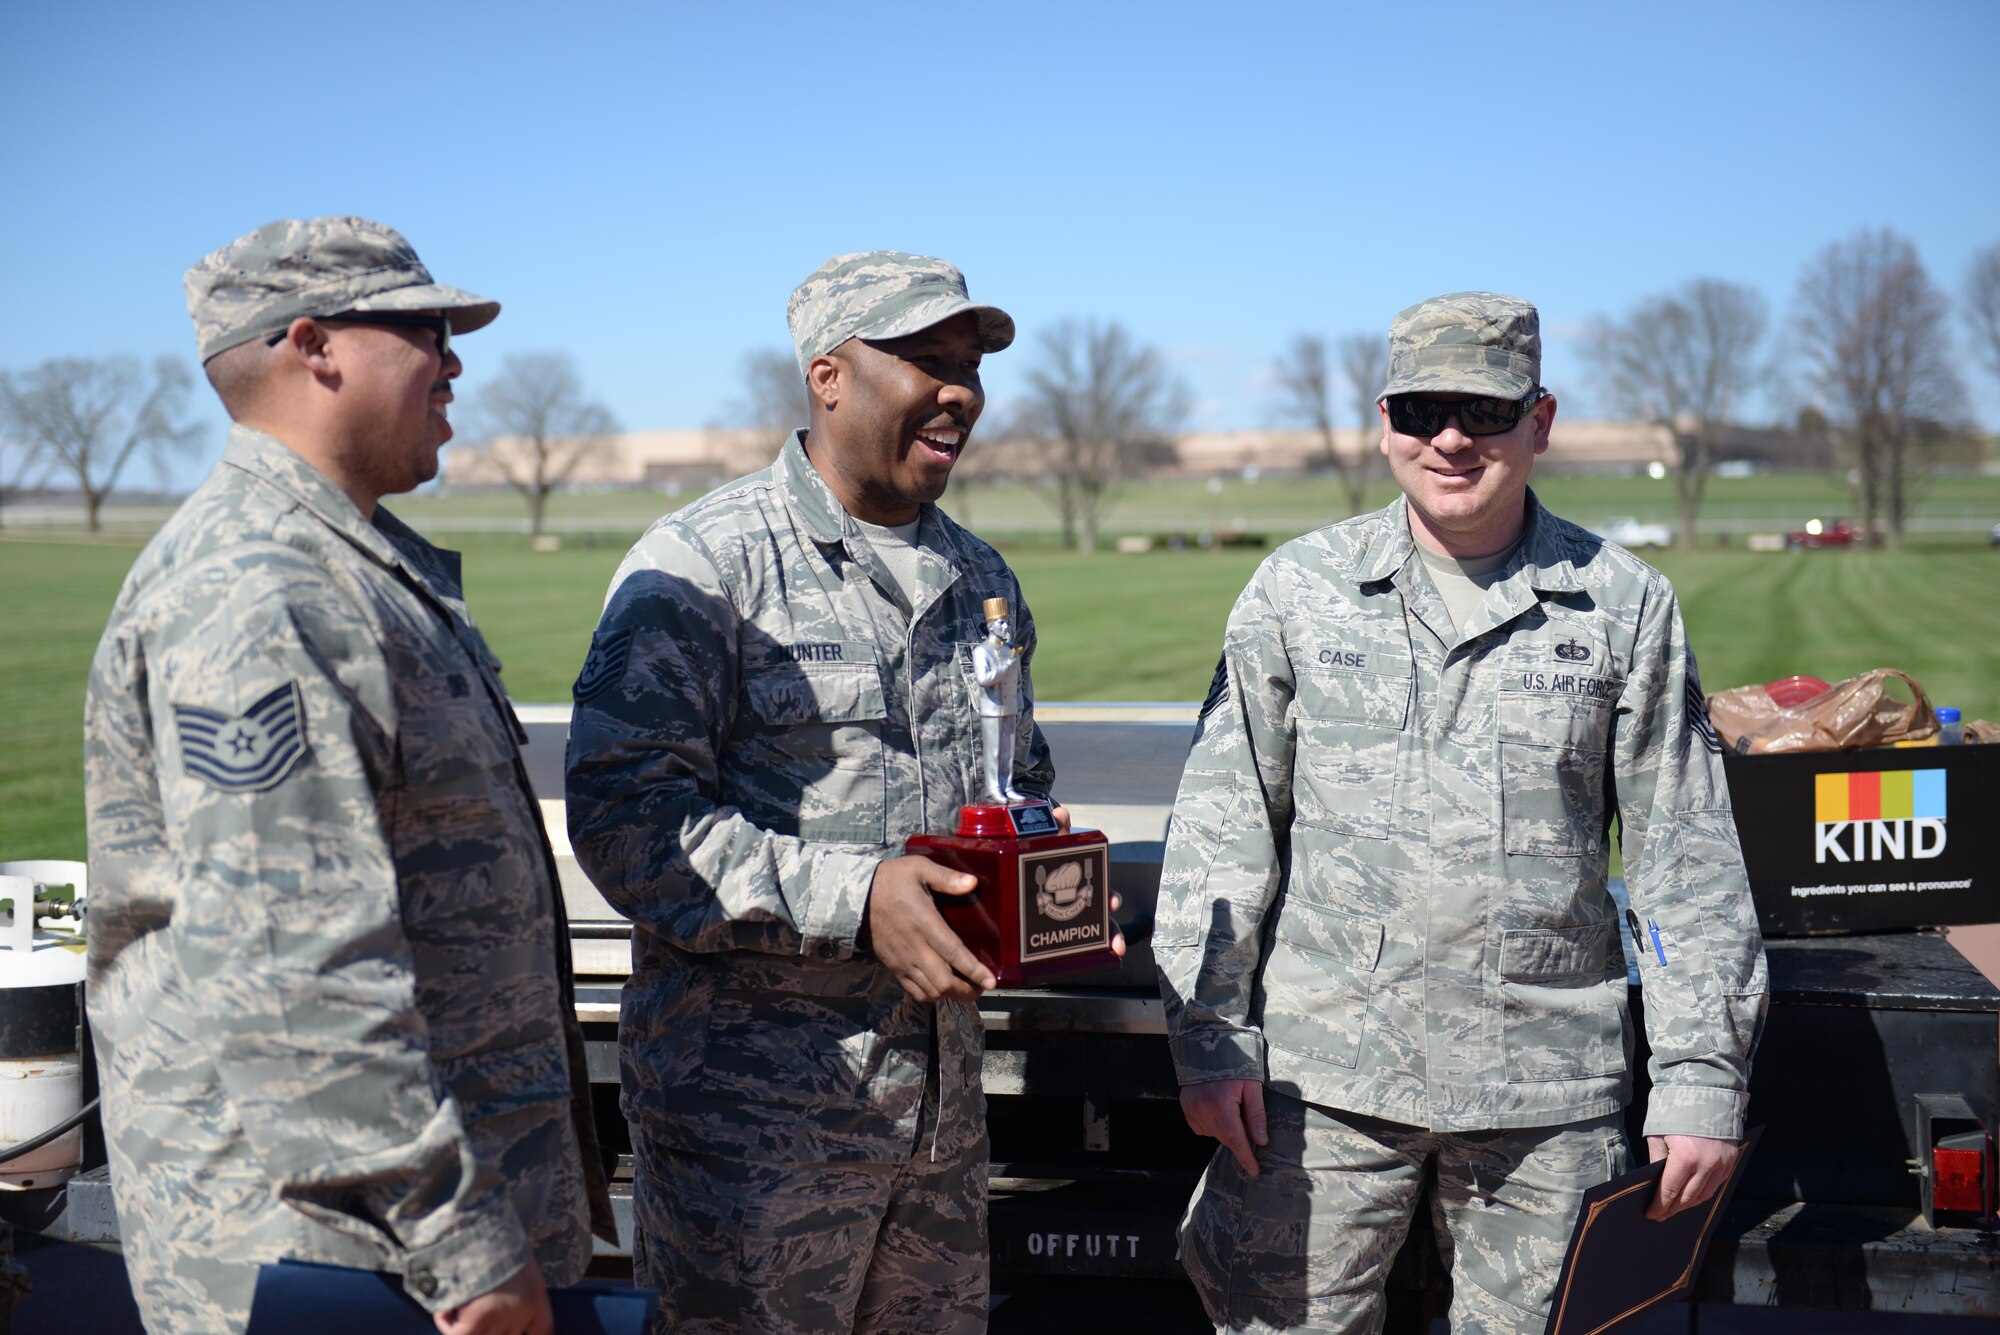 The non-commission officer team won the third annual Offutt Top Chef Grill Masters competition at Offutt Air Force Base, Neb., April 6, 2017 held on the parade field. Four teams competed against one another by creating three dishes to be judged on taste, presentation and creativity. (U.S. Air Force photo by Zachary Hada)